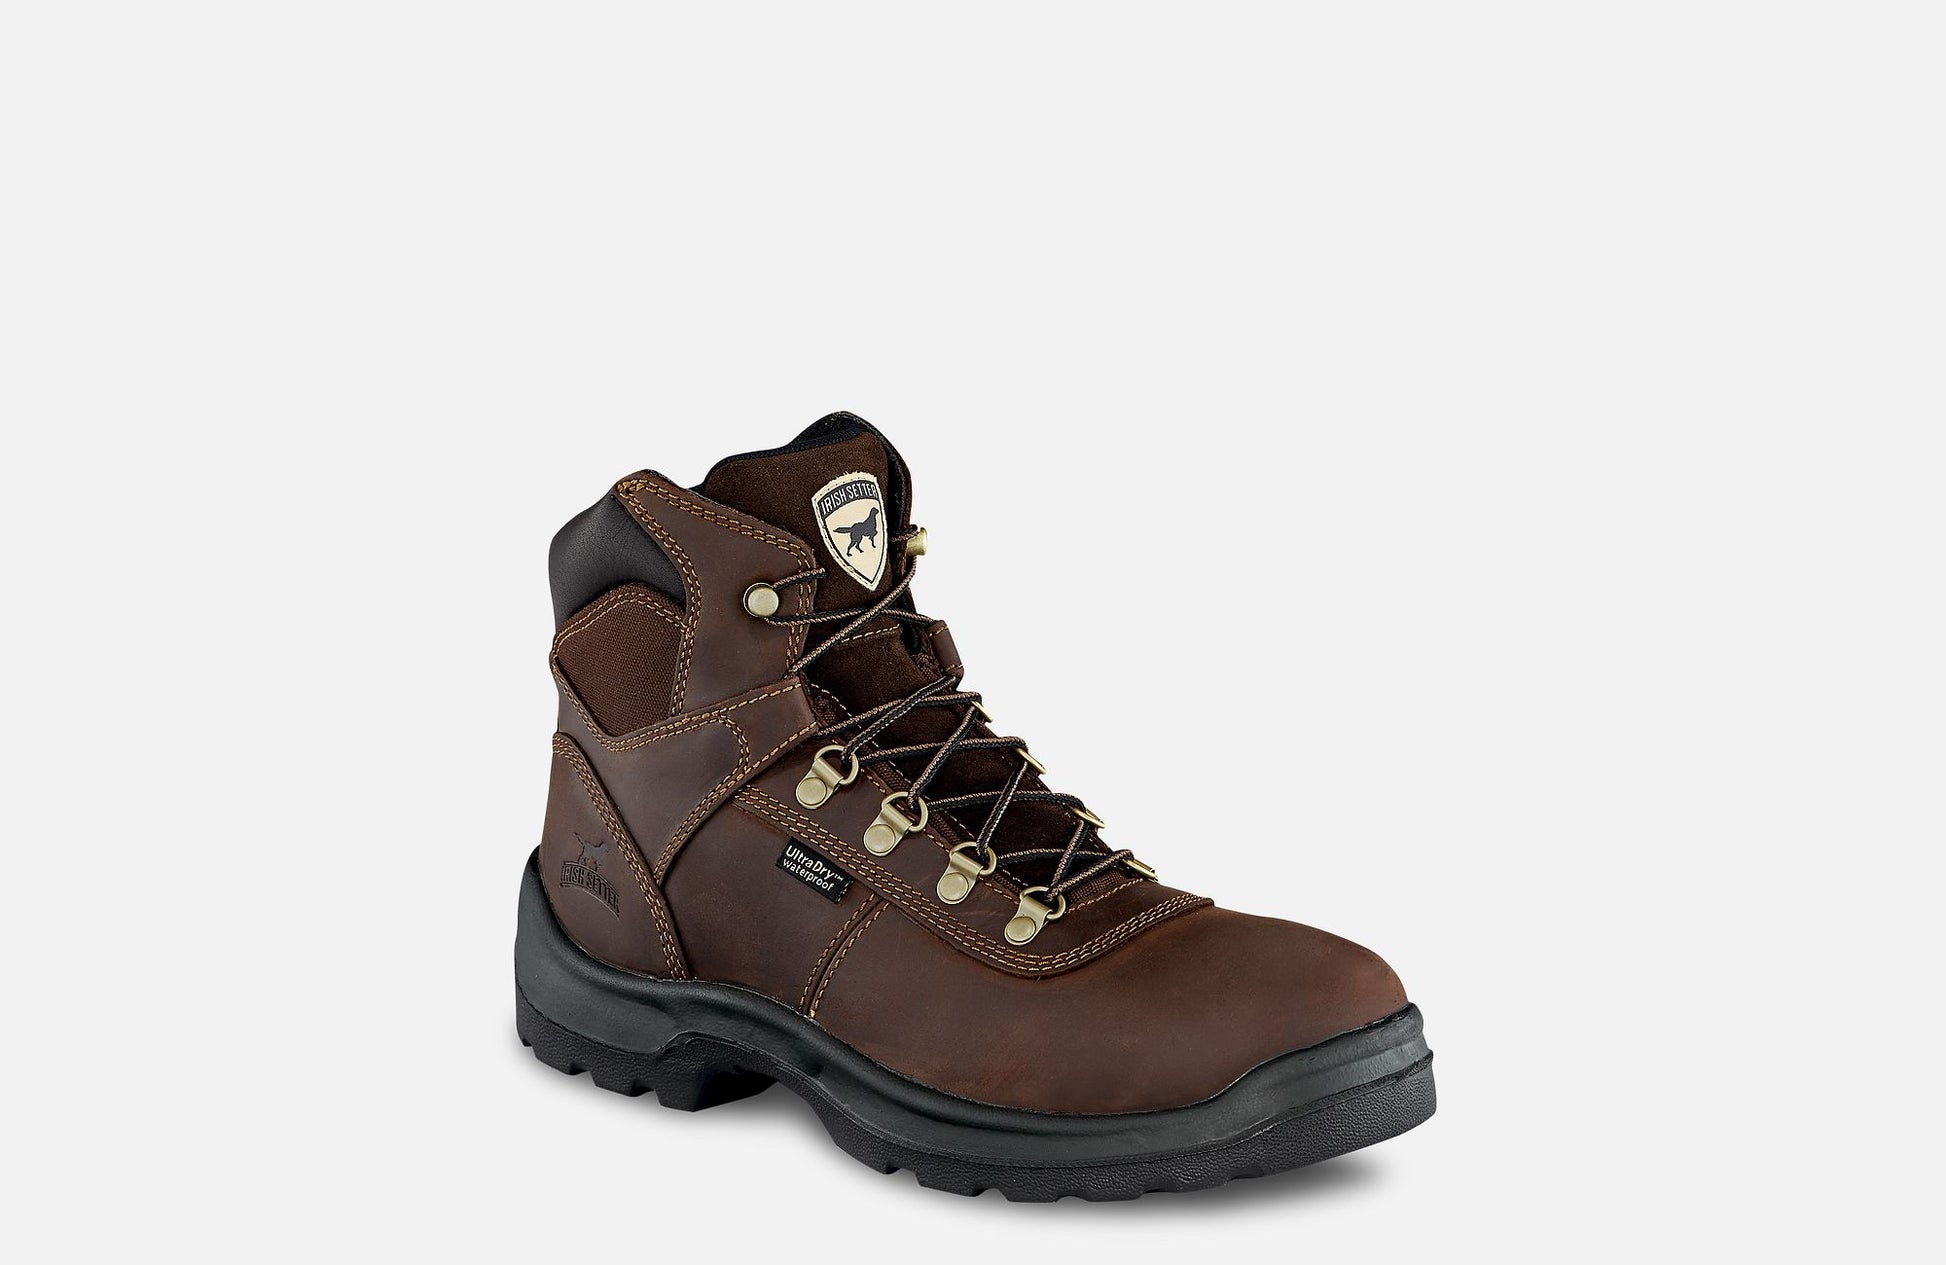 IRISH SETTER ELY 6-INCH WATERPROOF LEATHER SAFETY TOE BOOT - MEN'S